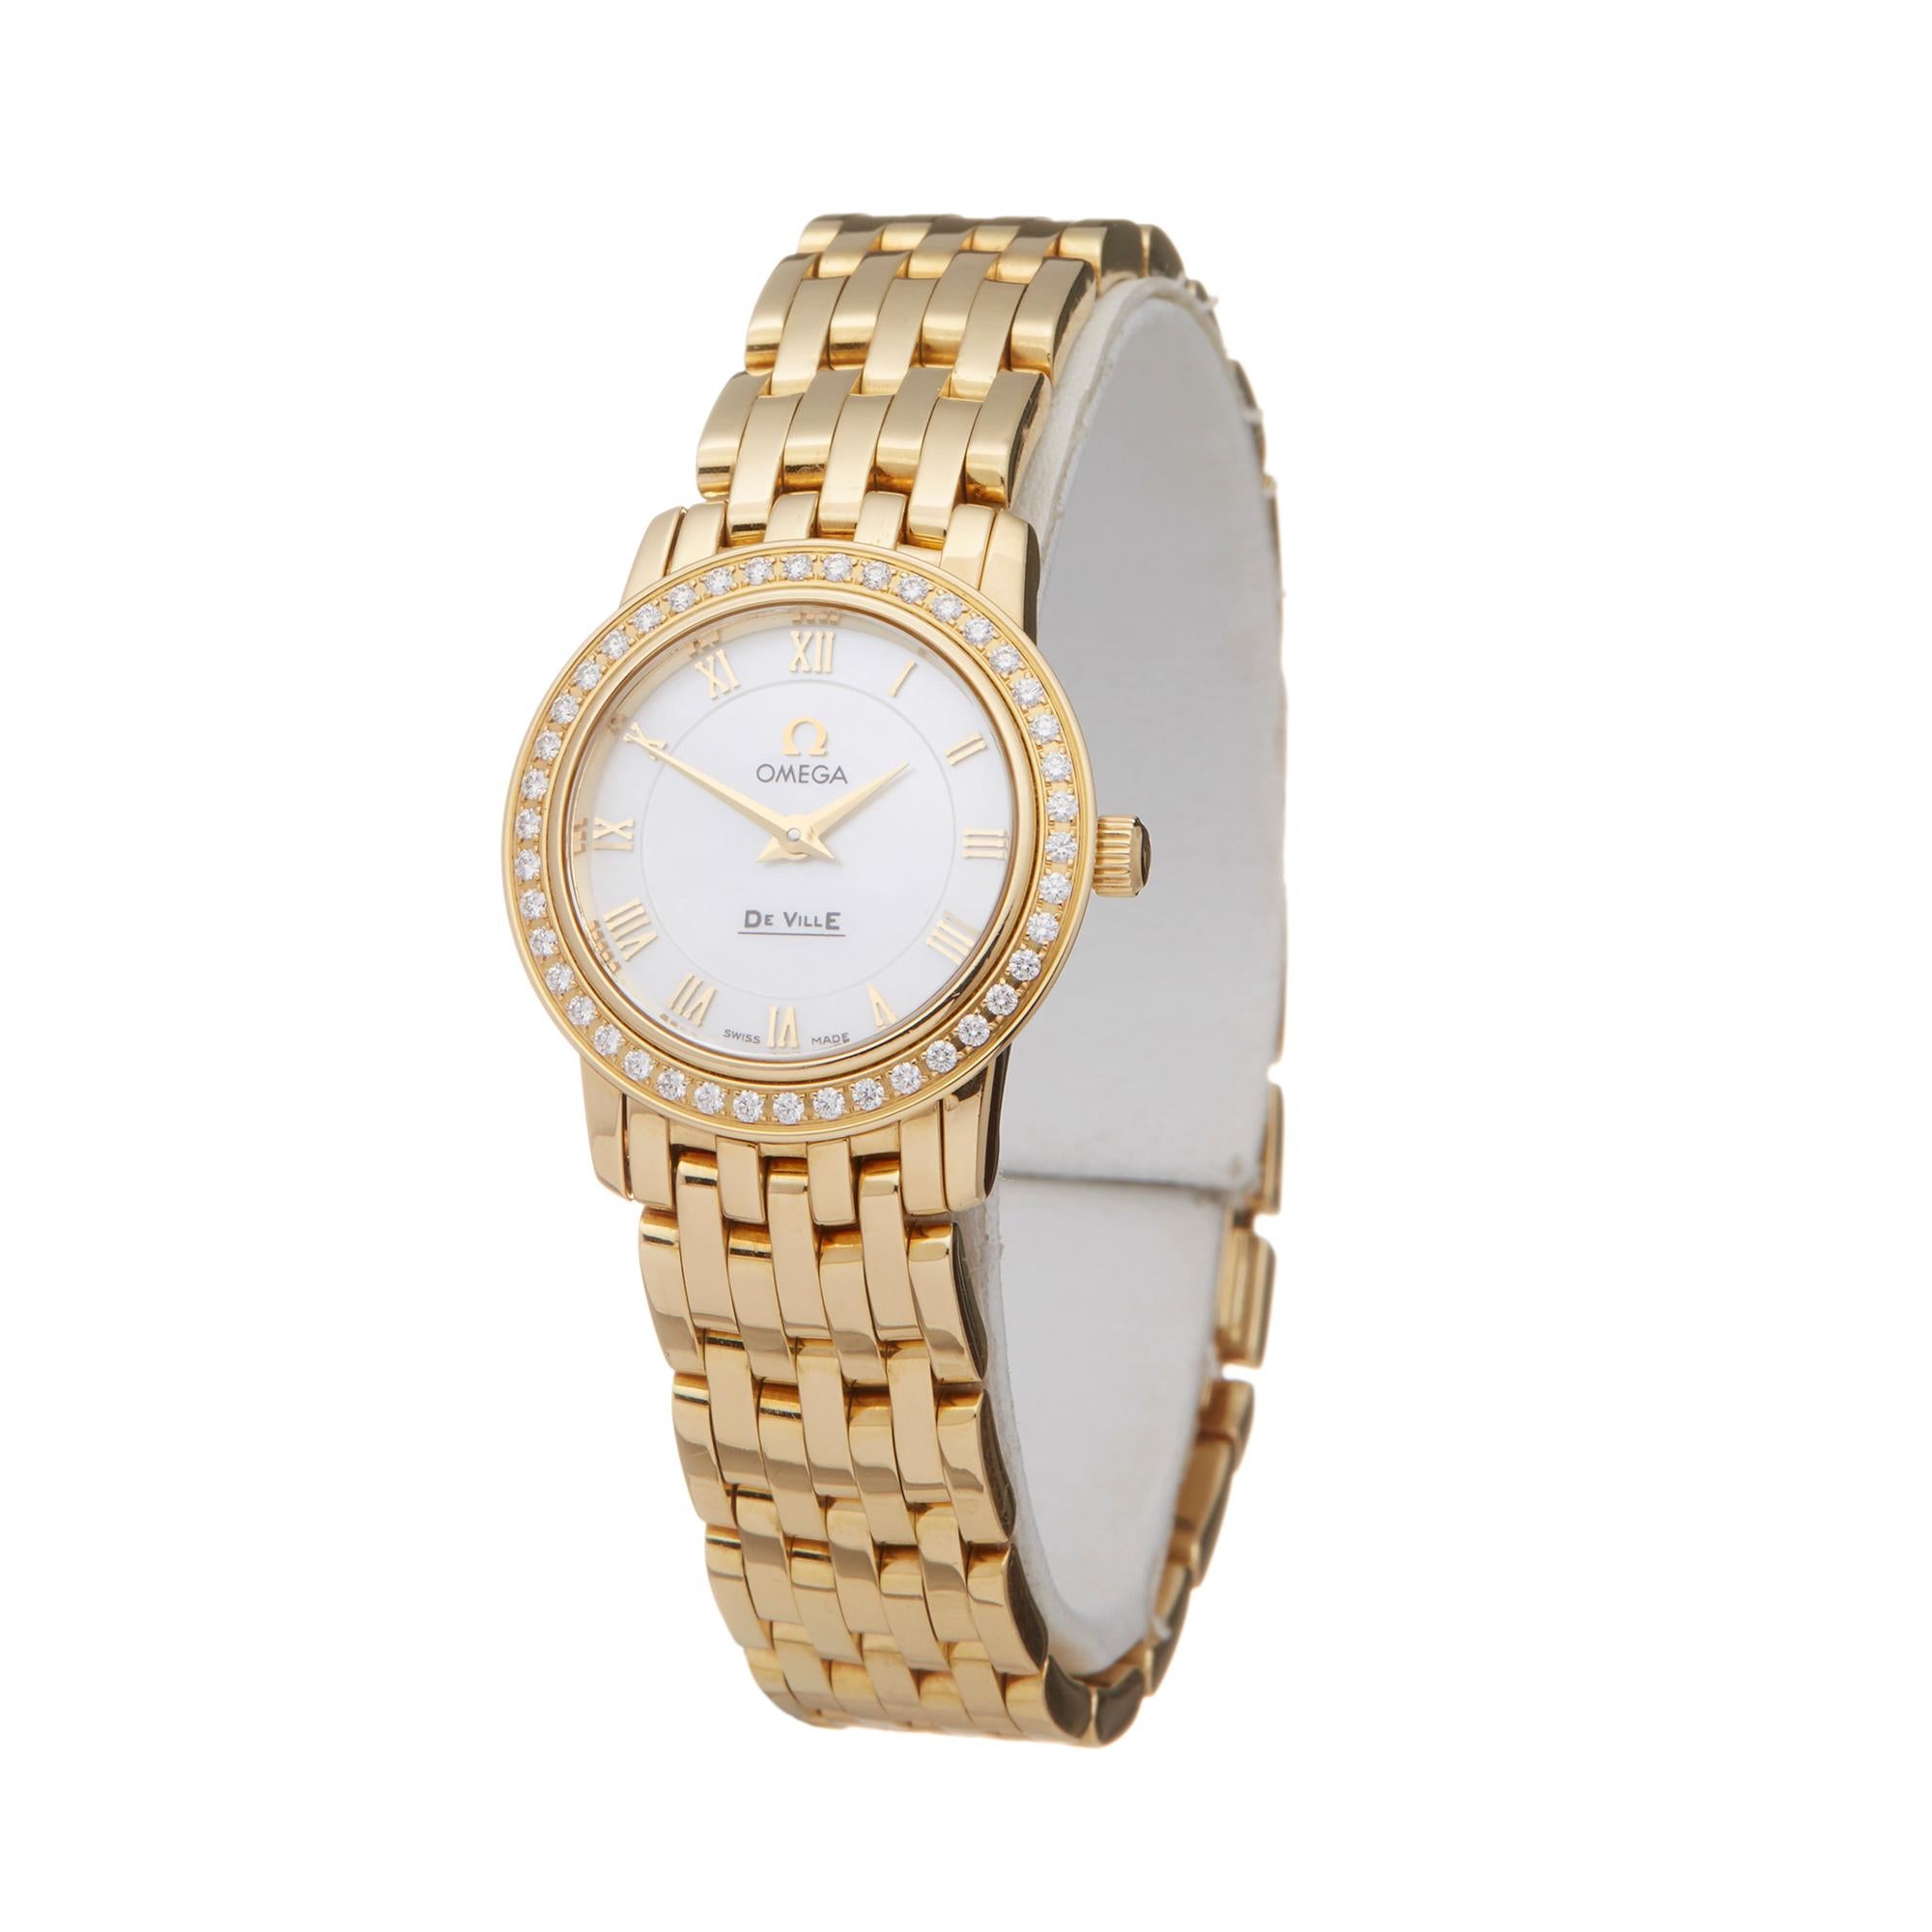 Ref: COM2163
Manufacturer: Omega
Model: De Ville
Model Ref: 417.57.100
Age: Circa 2000's
Gender: Ladies
Complete With: Box Only
Dial: Roman White Mother Of Pearl 
Glass: Sapphire Crystal
Movement: Quartz
Water Resistance: To Manufacturers